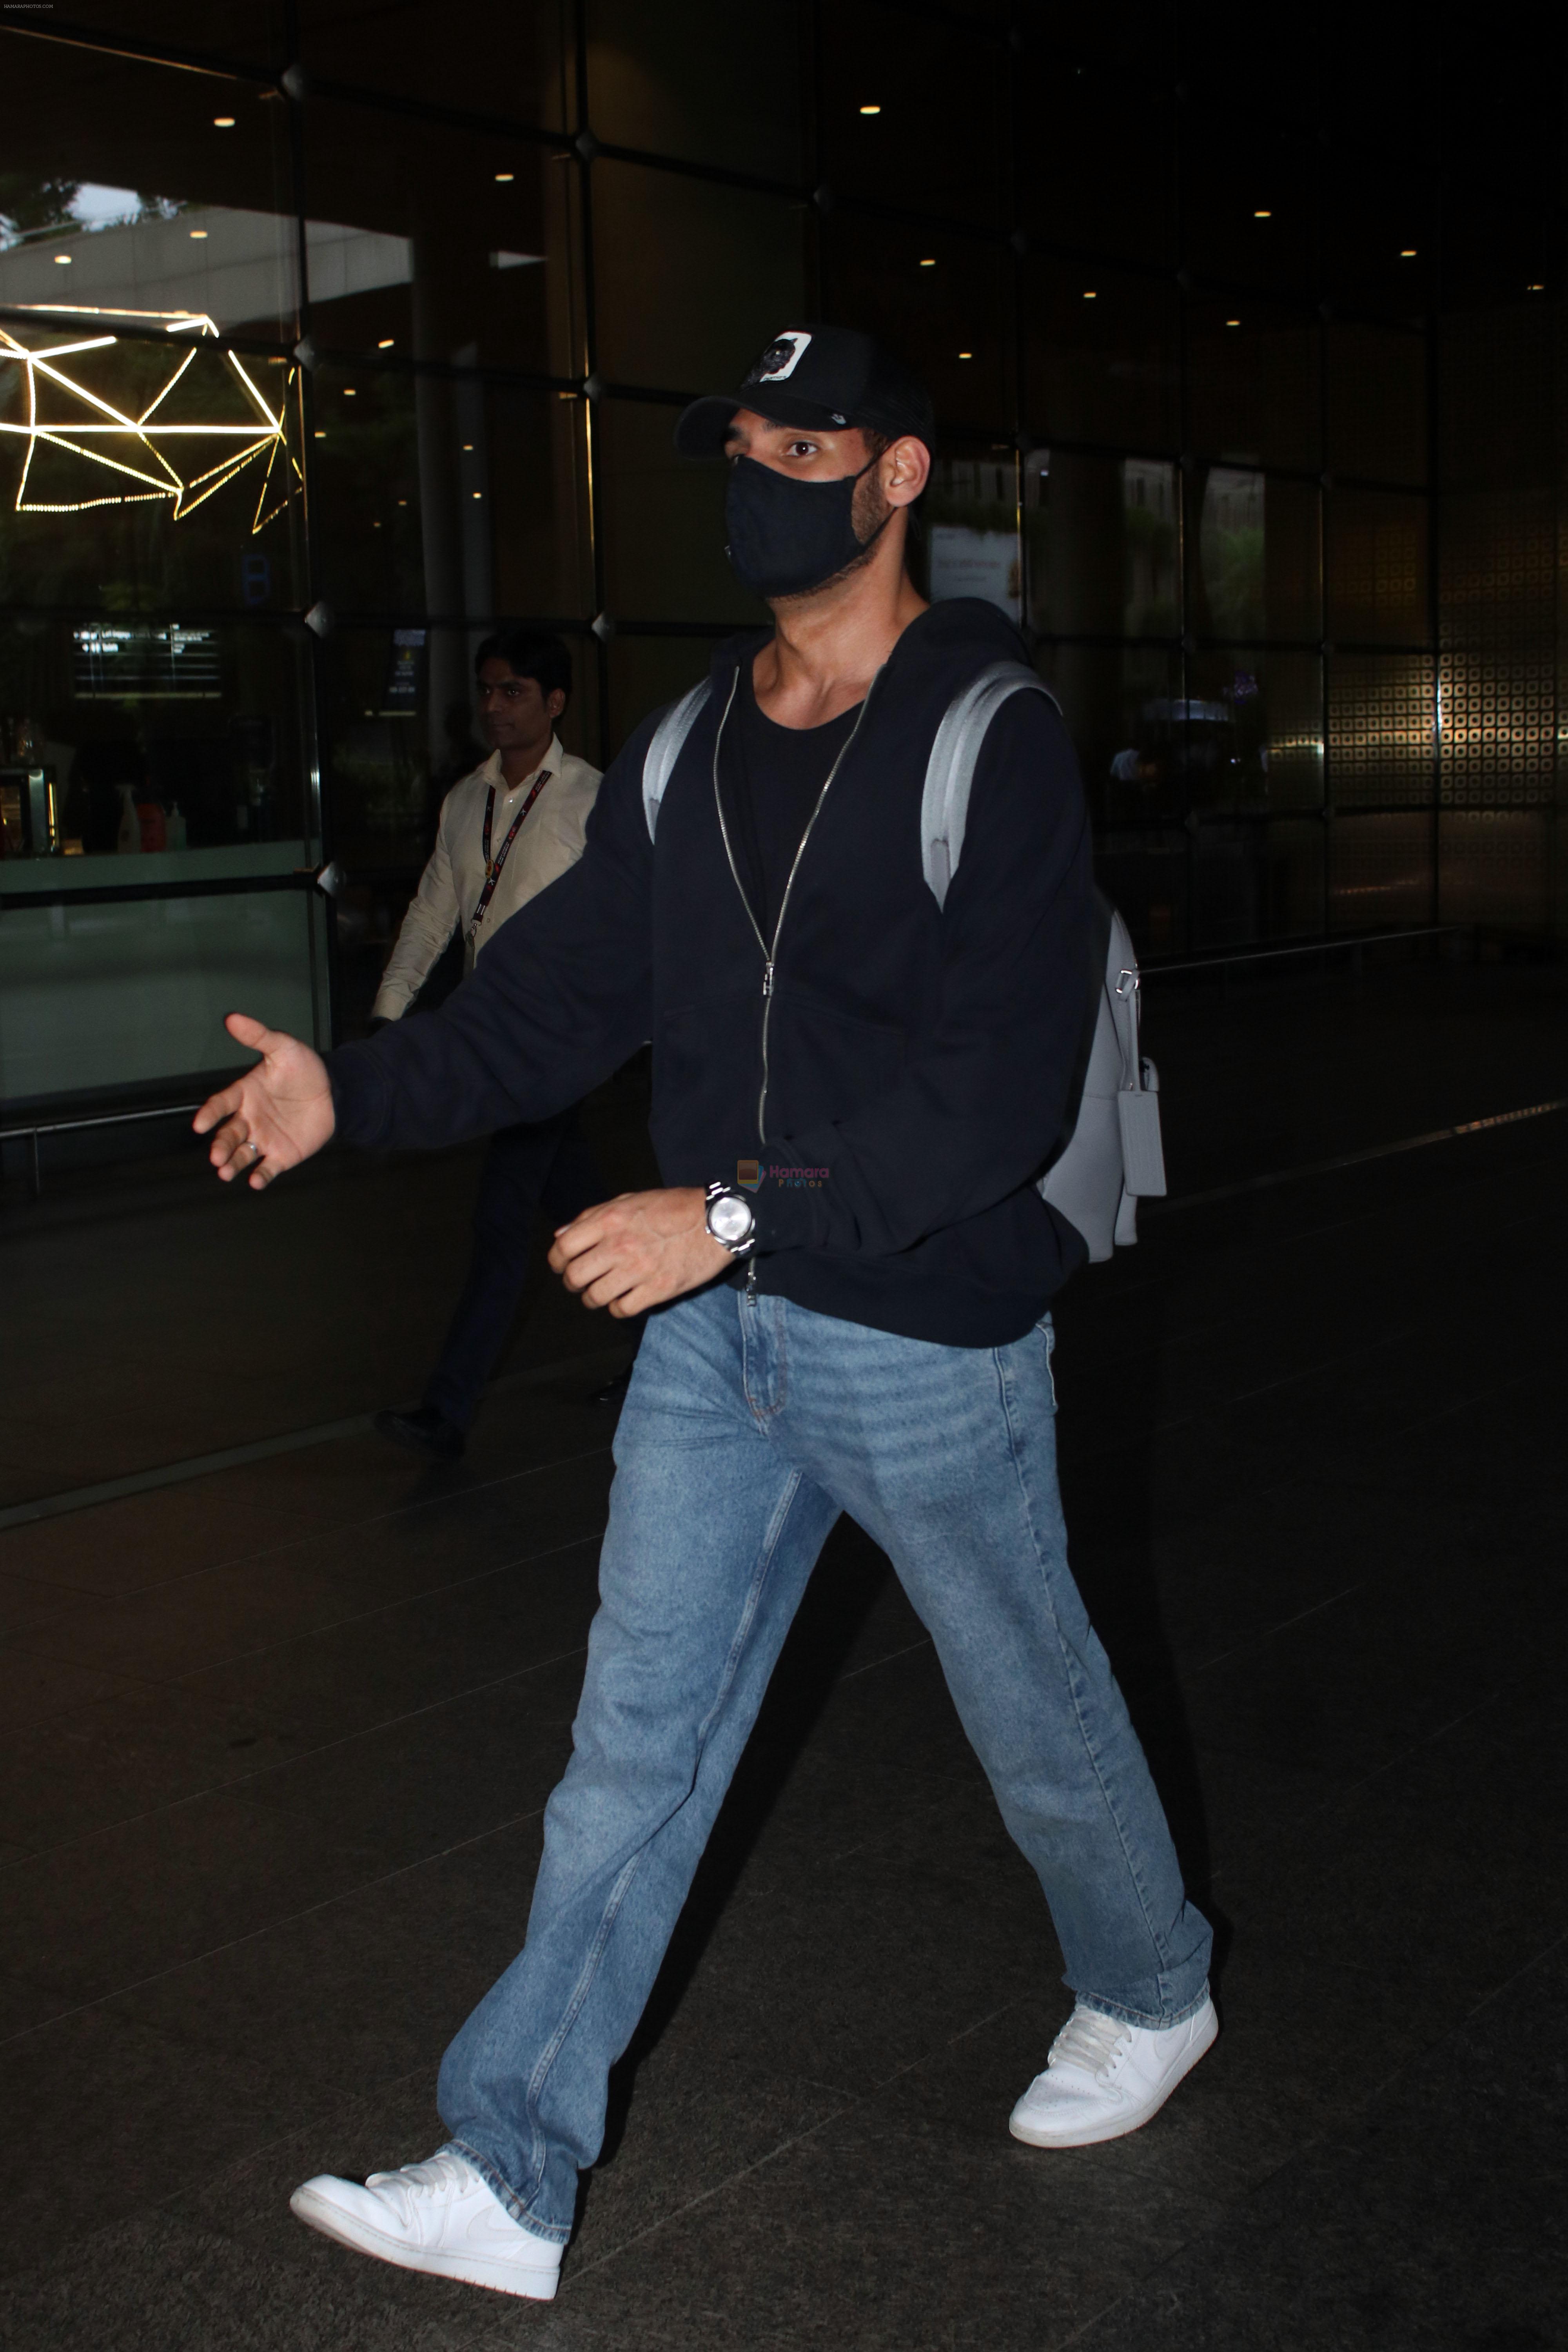 Ahan Shetty seen at the airport on 24 July 2023